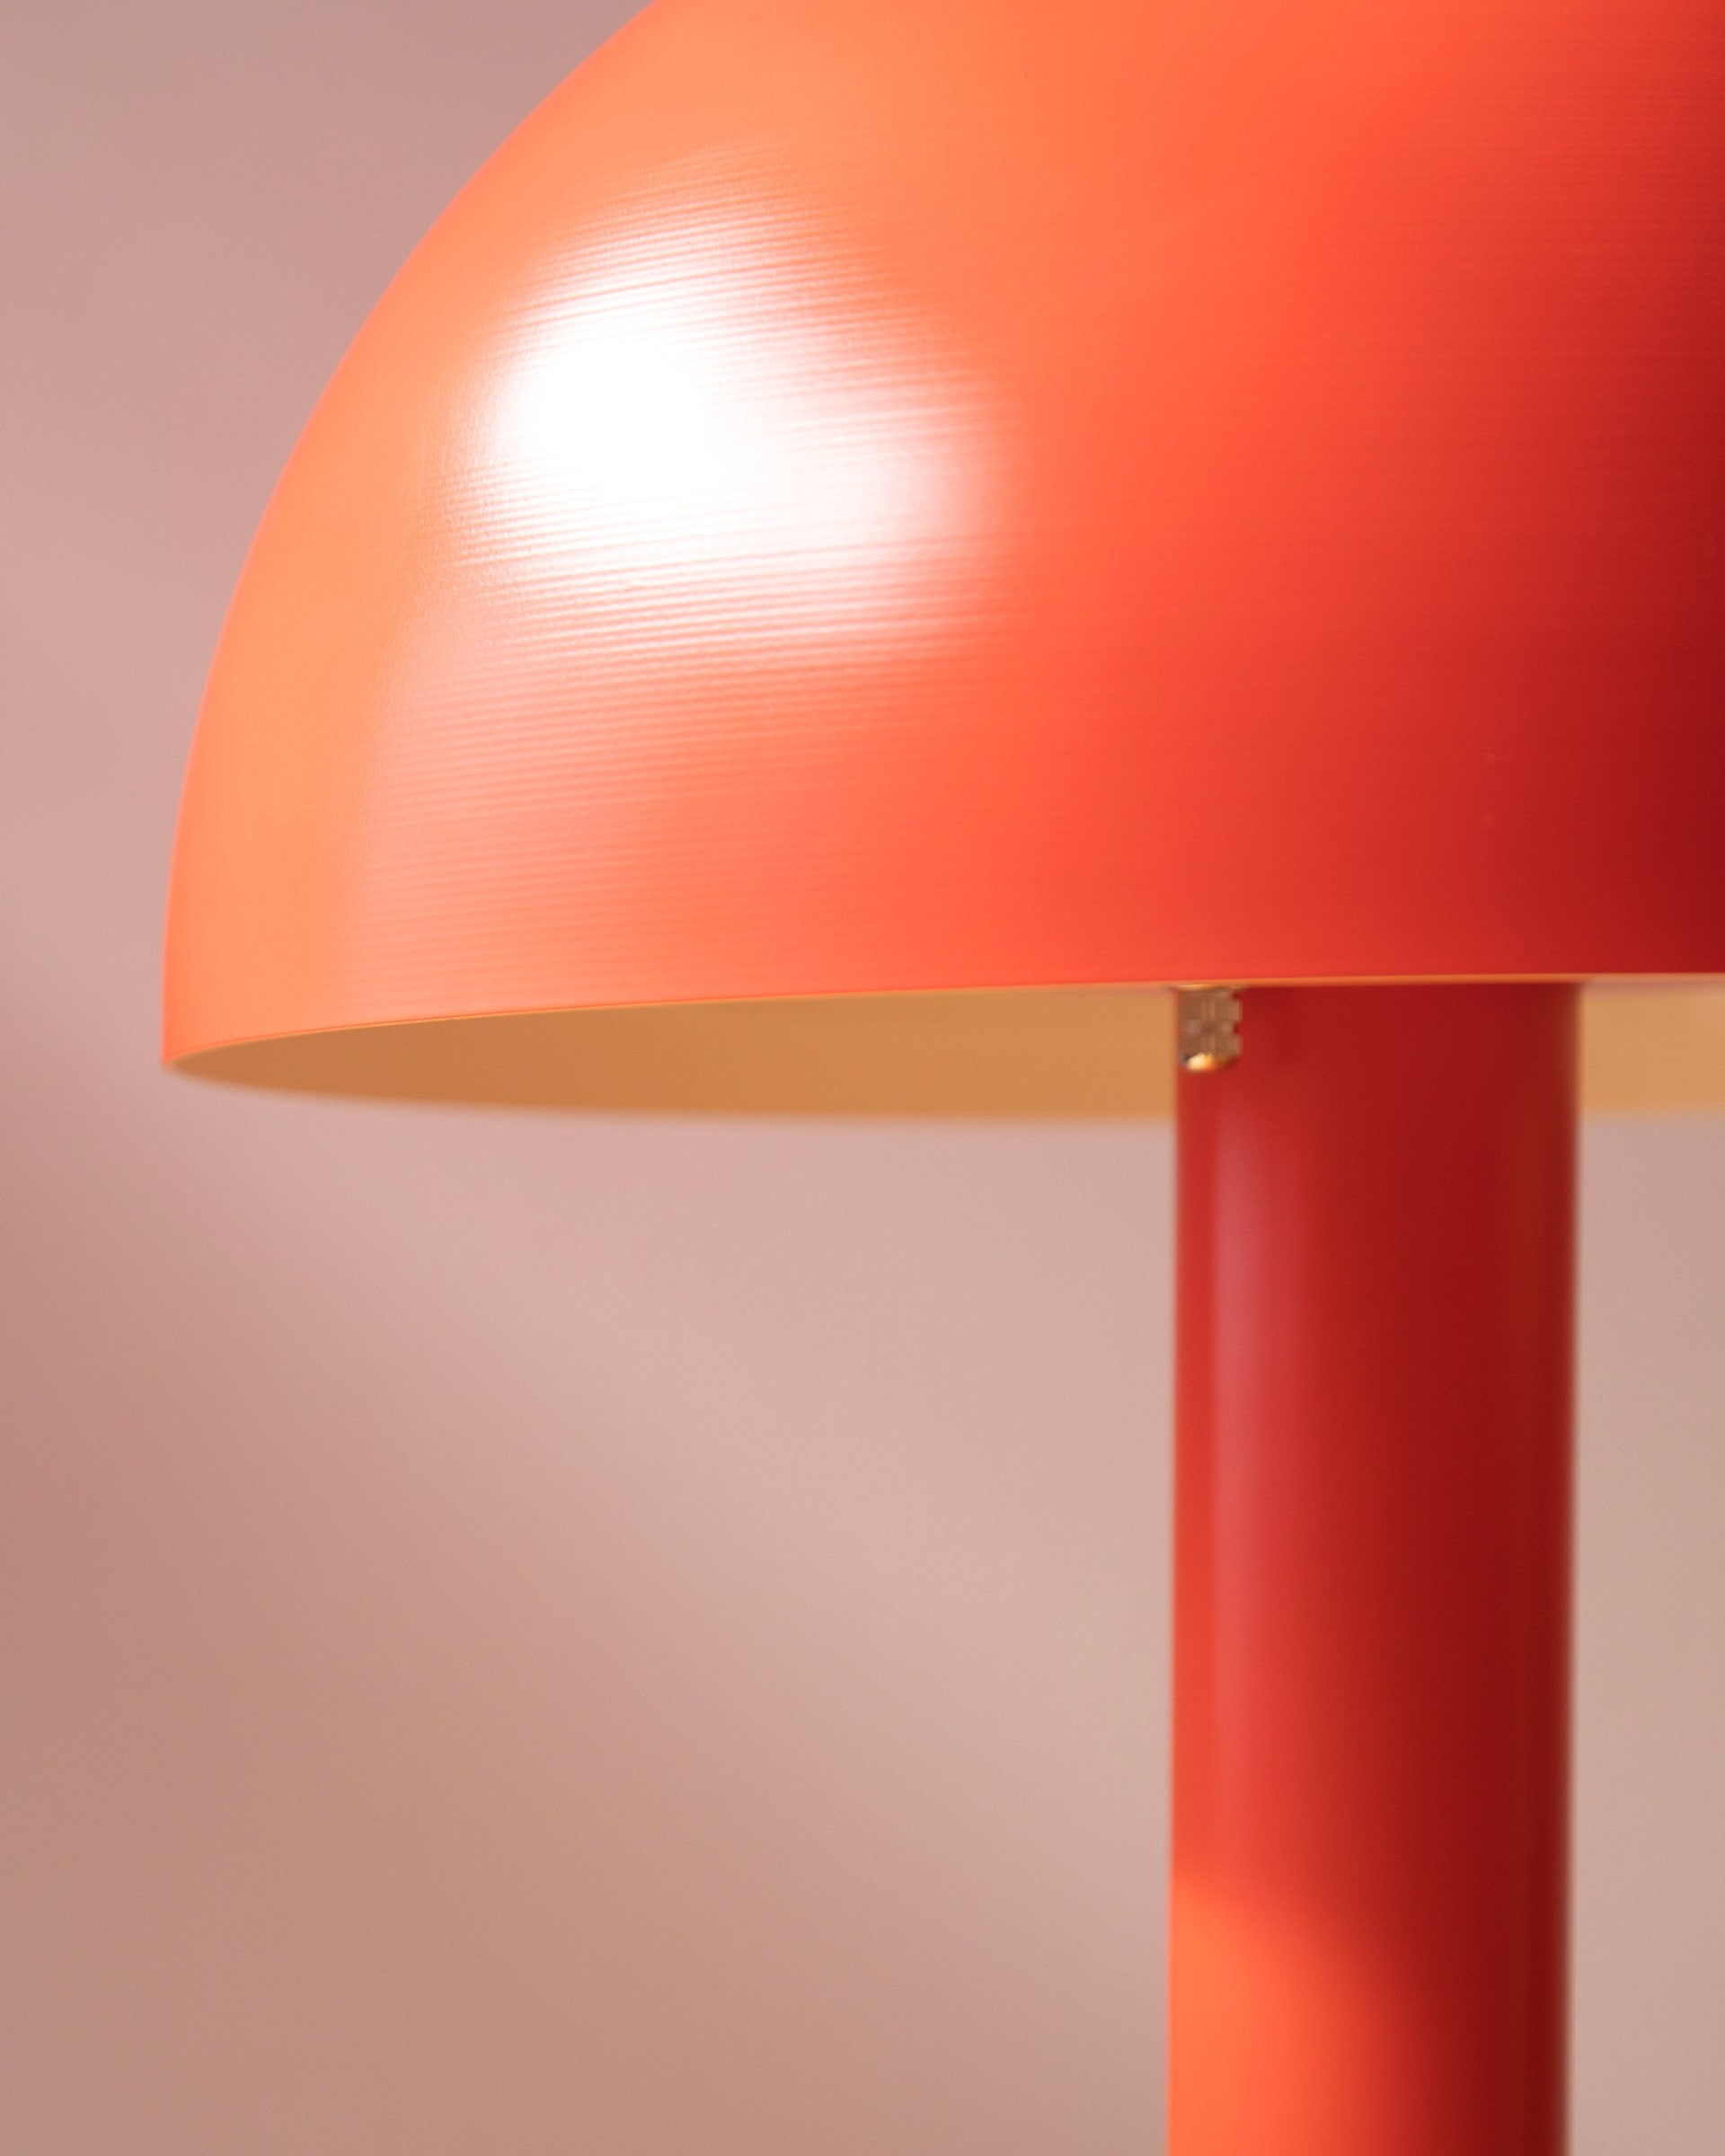 The Sidnie Lamp in Persimmon Satin